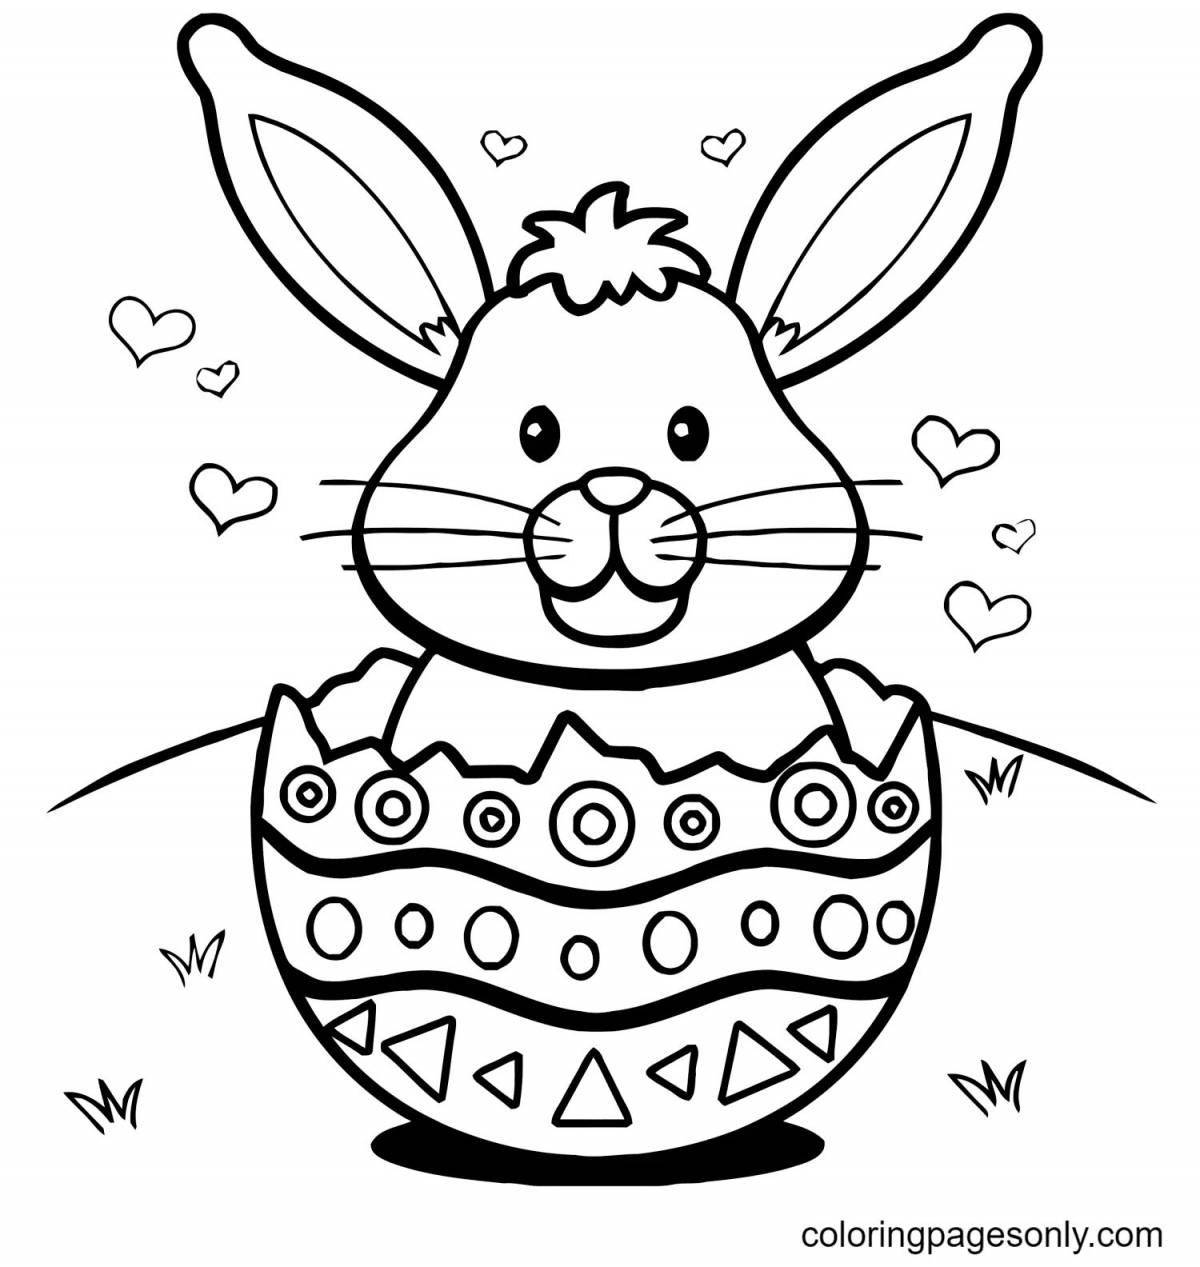 Witty easter bunny coloring book